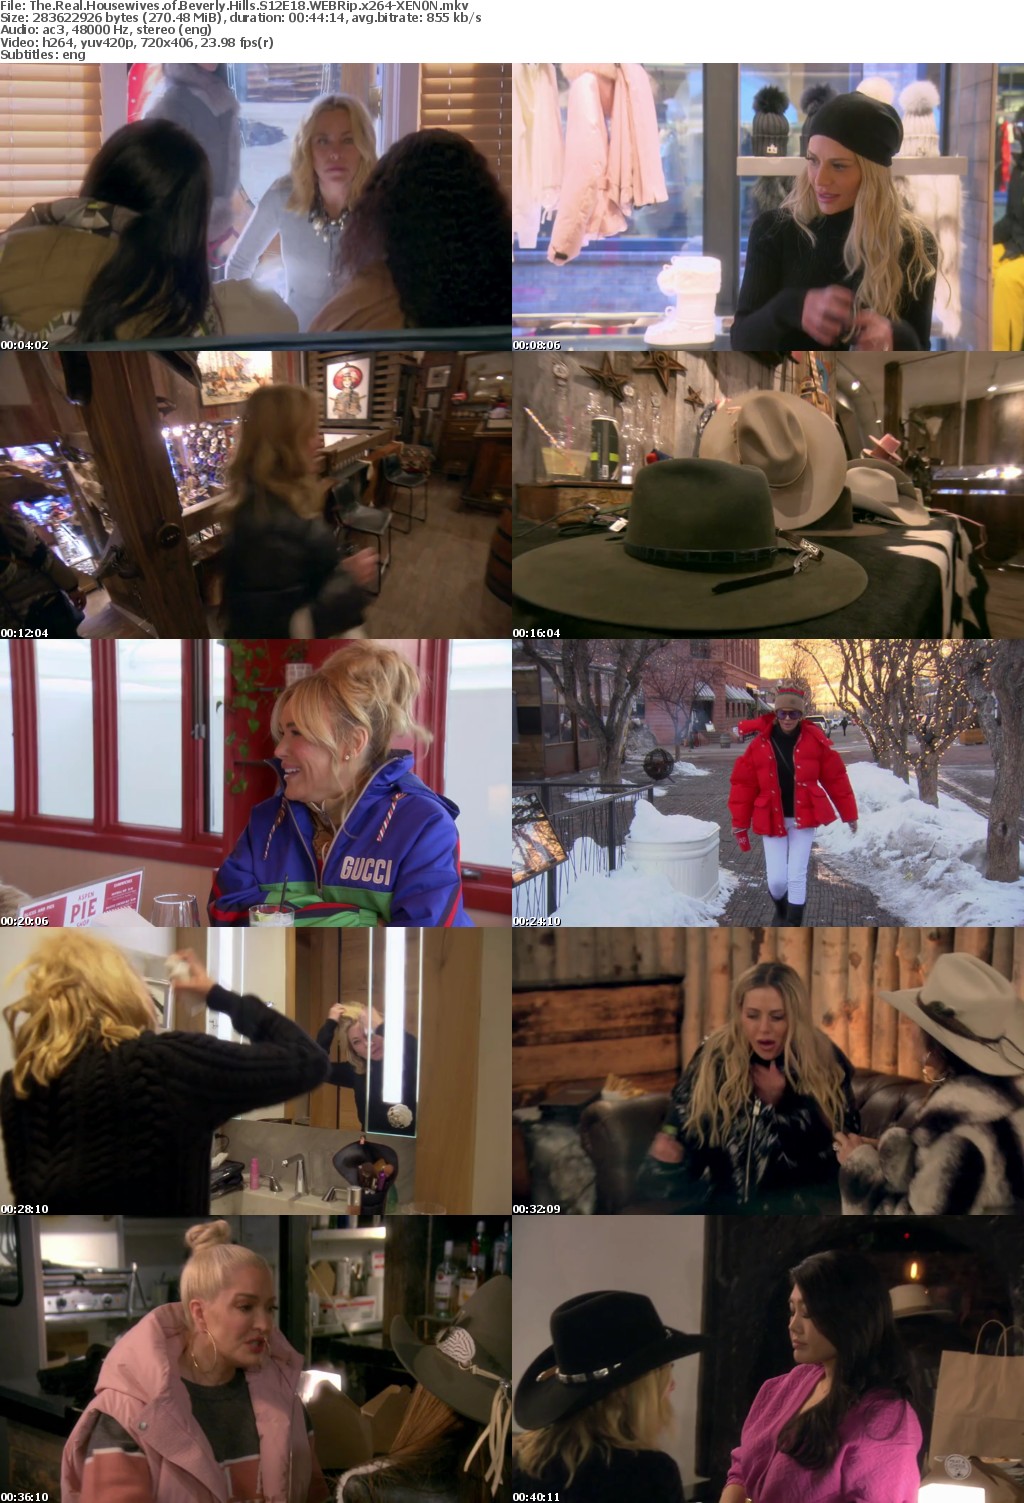 The Real Housewives of Beverly Hills S12E18 WEBRip x264-XEN0N